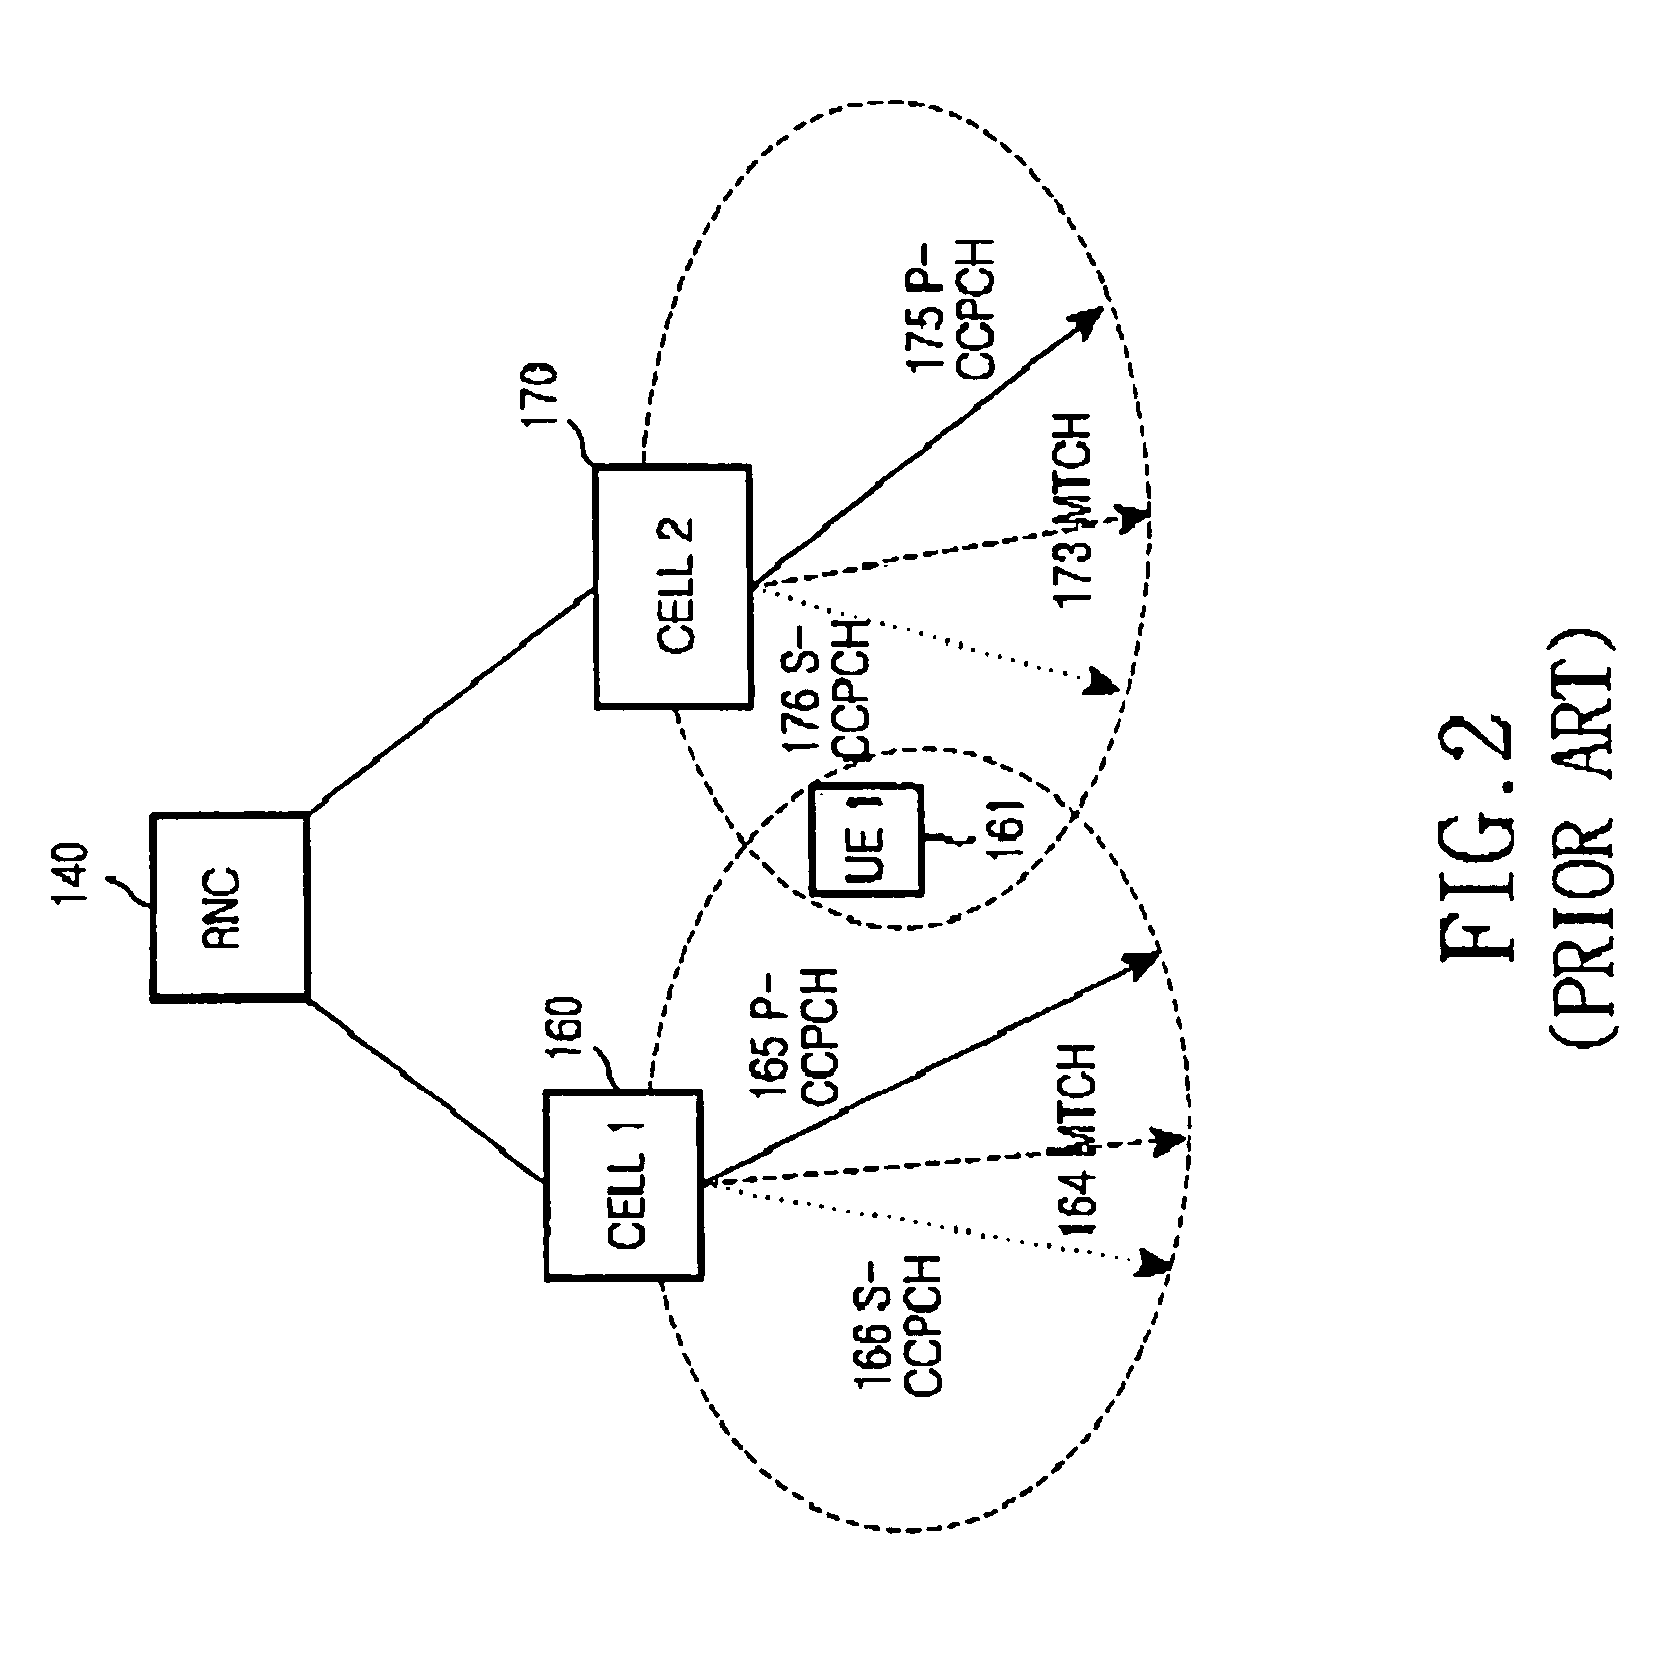 Method for cell reselection in an MBMS mobile communication system